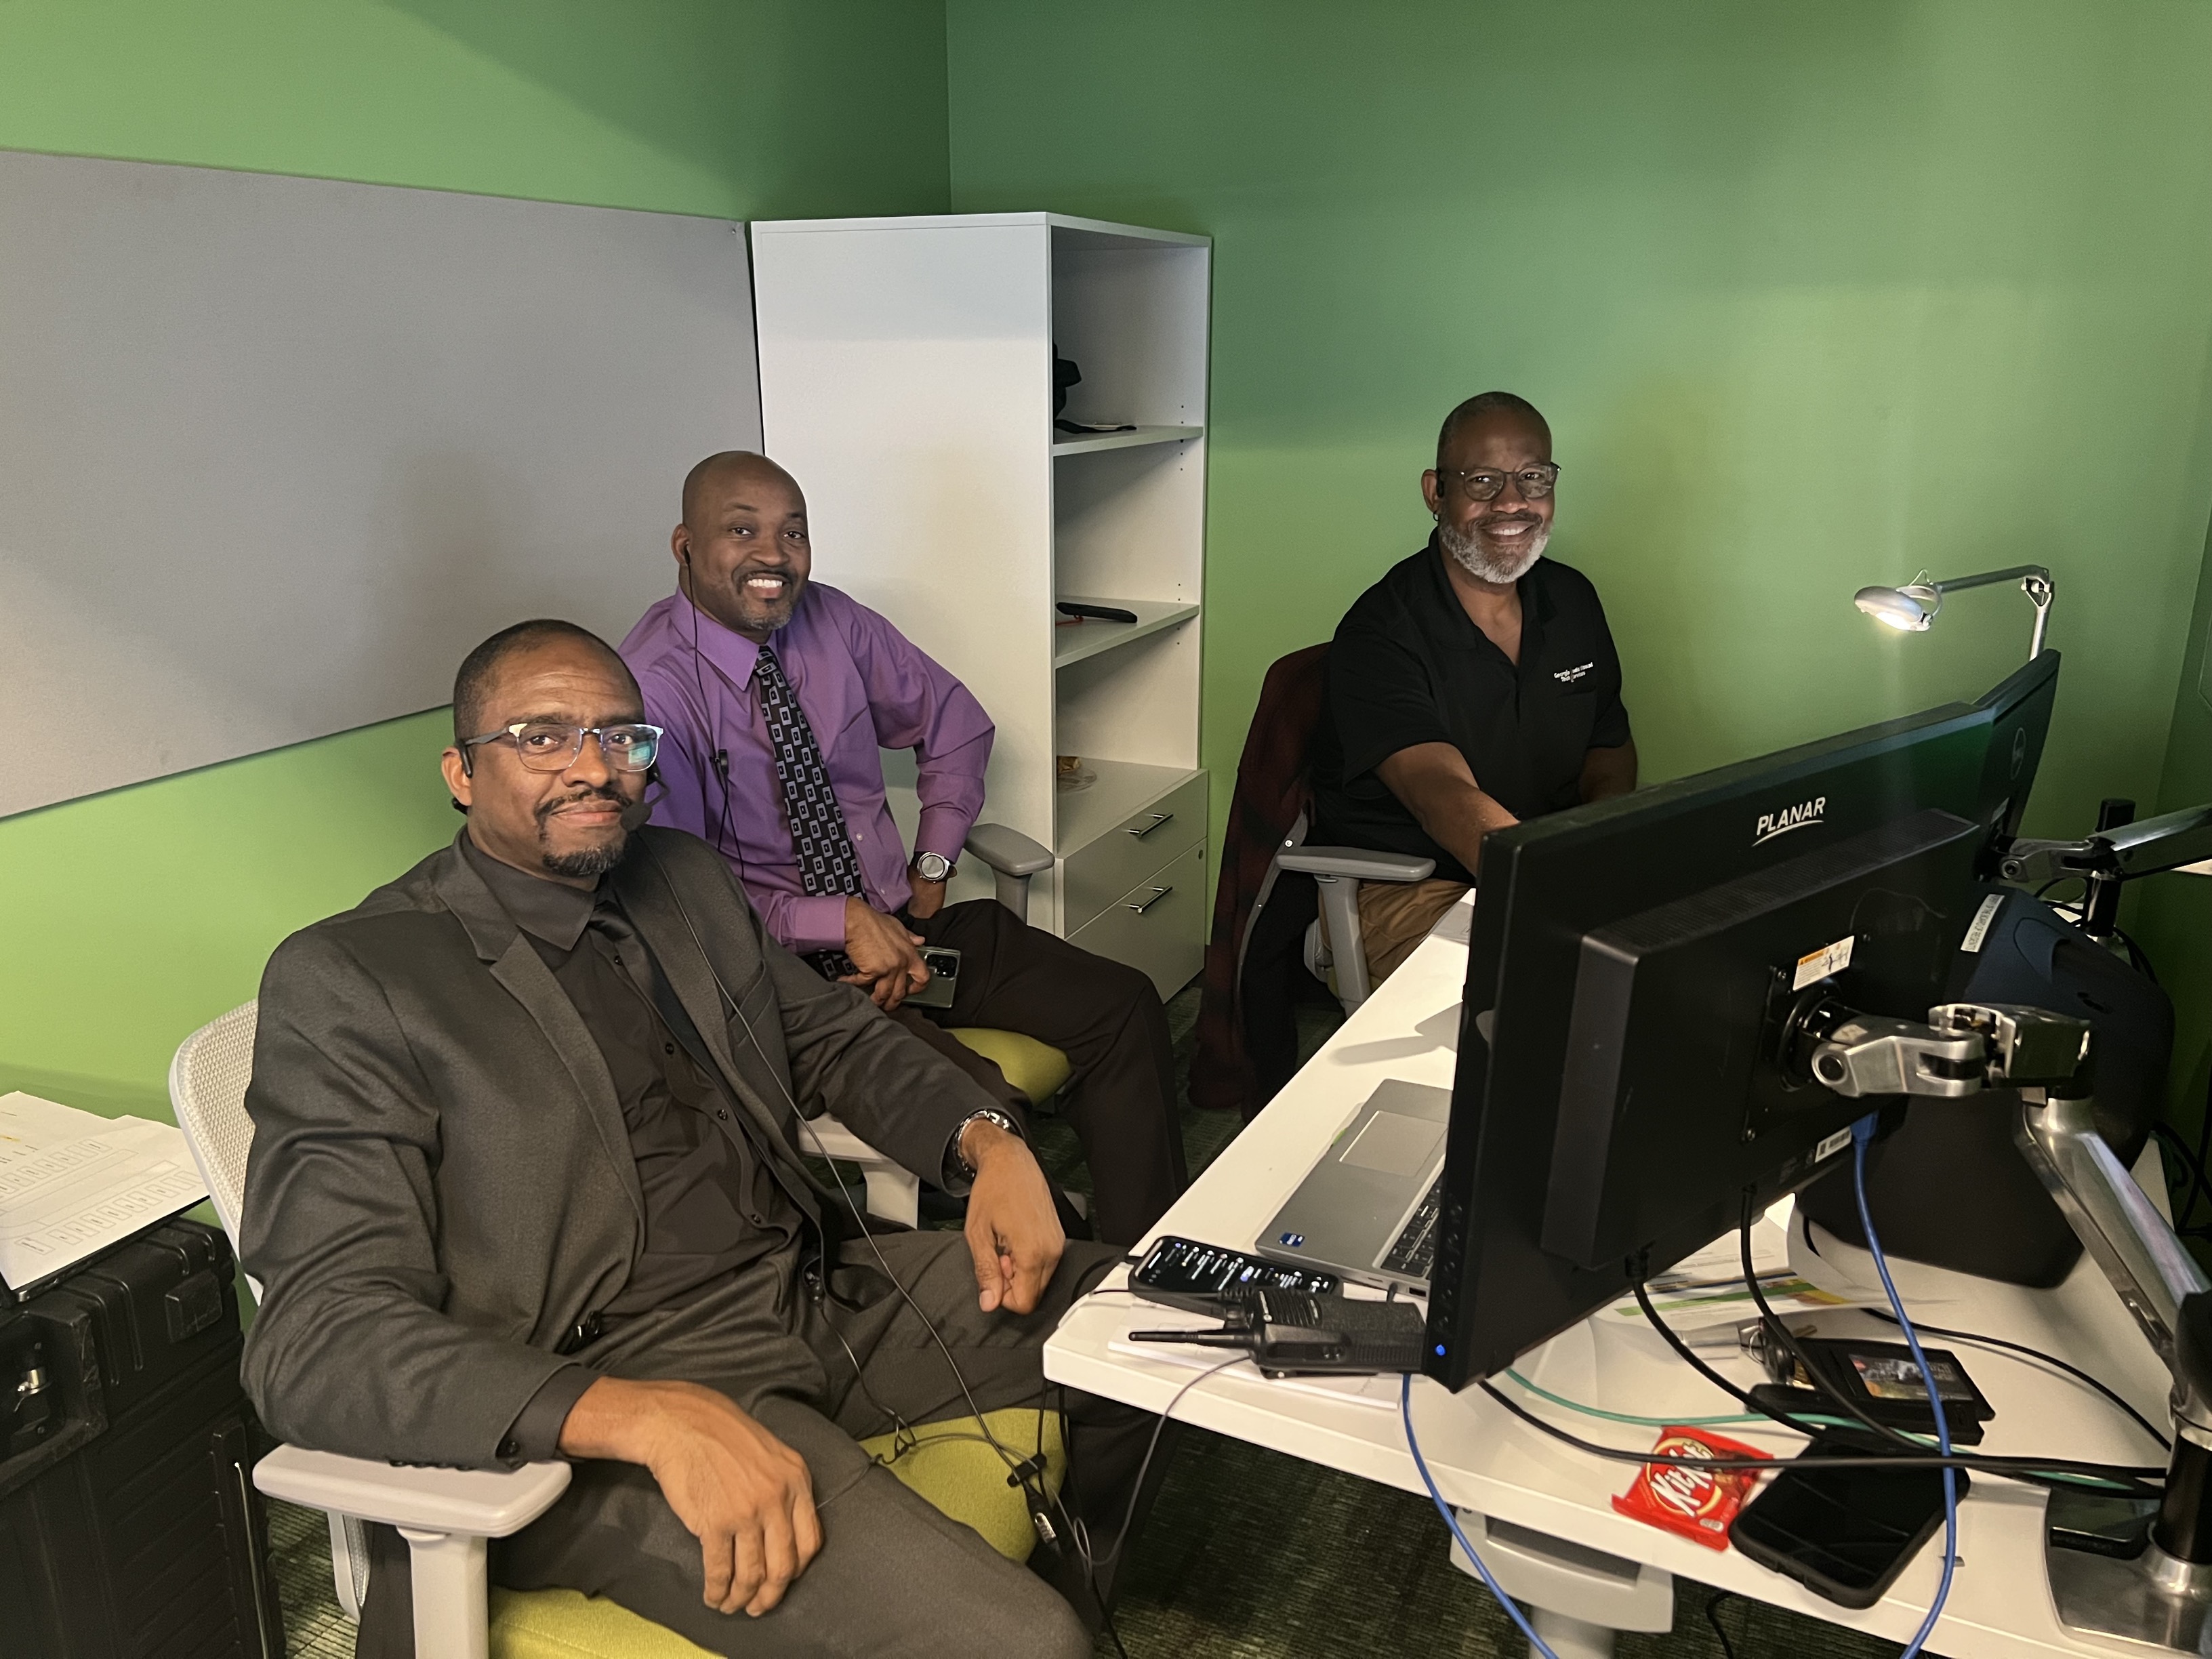 Featured from left to right: Charlie Wright, A/V-IT Support&nbsp;professional manager senior;&nbsp;Marcus Garnett, A/V manager for the Board of Regents; and Quincy Thomas,&nbsp;AV-IT Support professional II.&nbsp;
